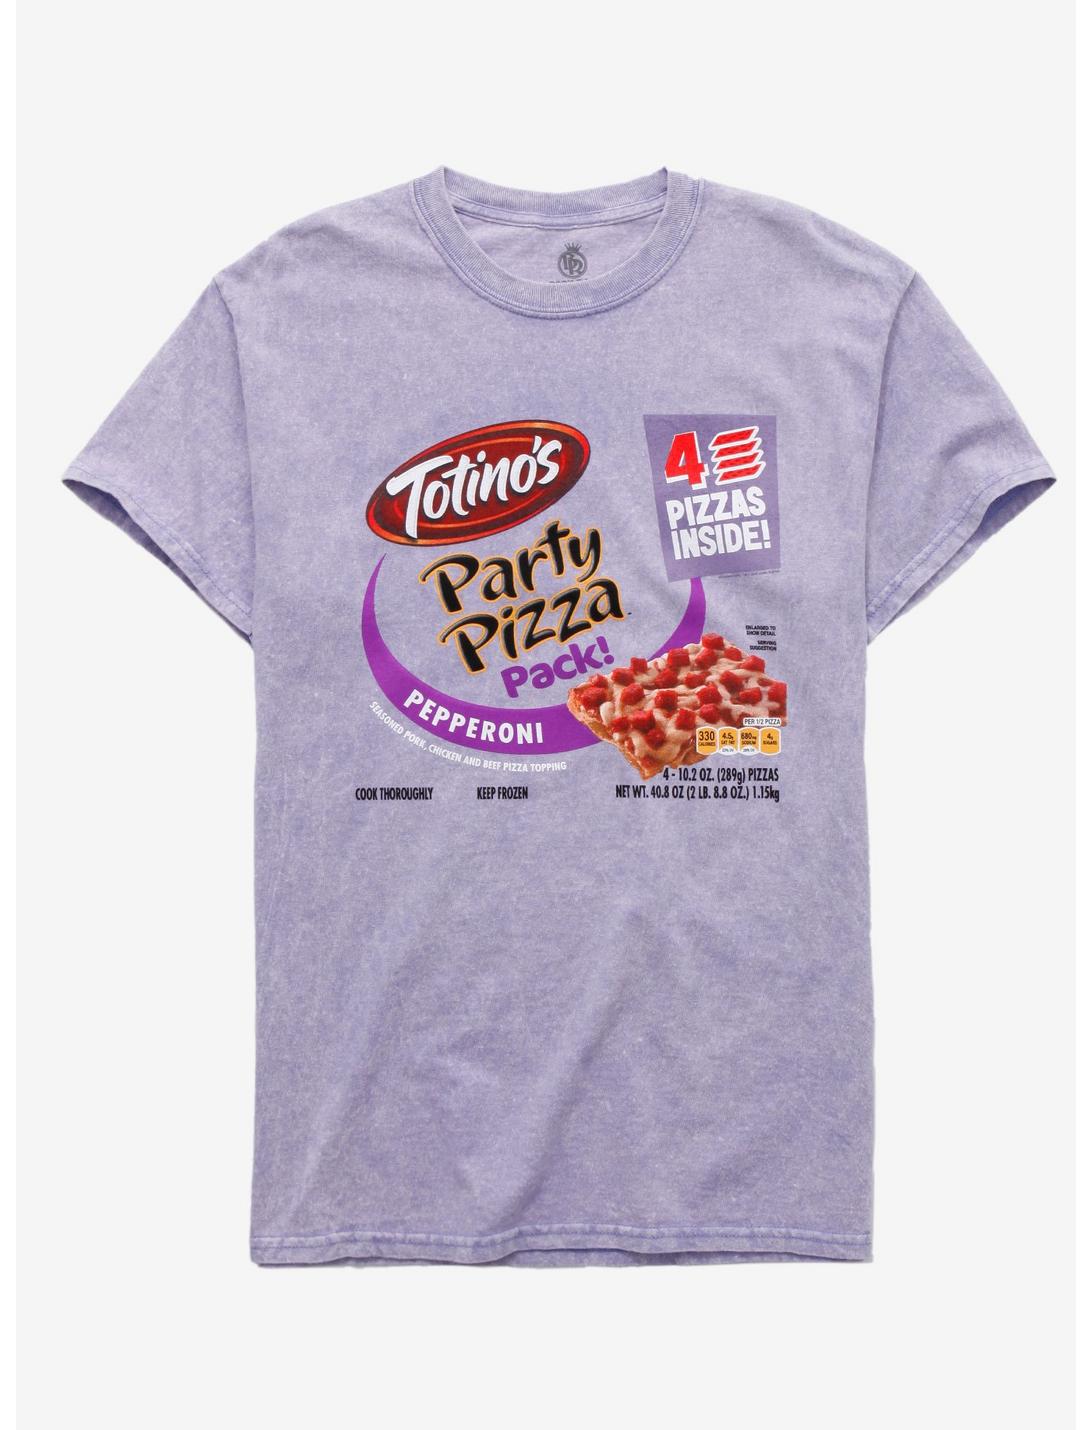 Totino's Party Pizza Pack Washed Girls T-Shirt, MULTI, hi-res